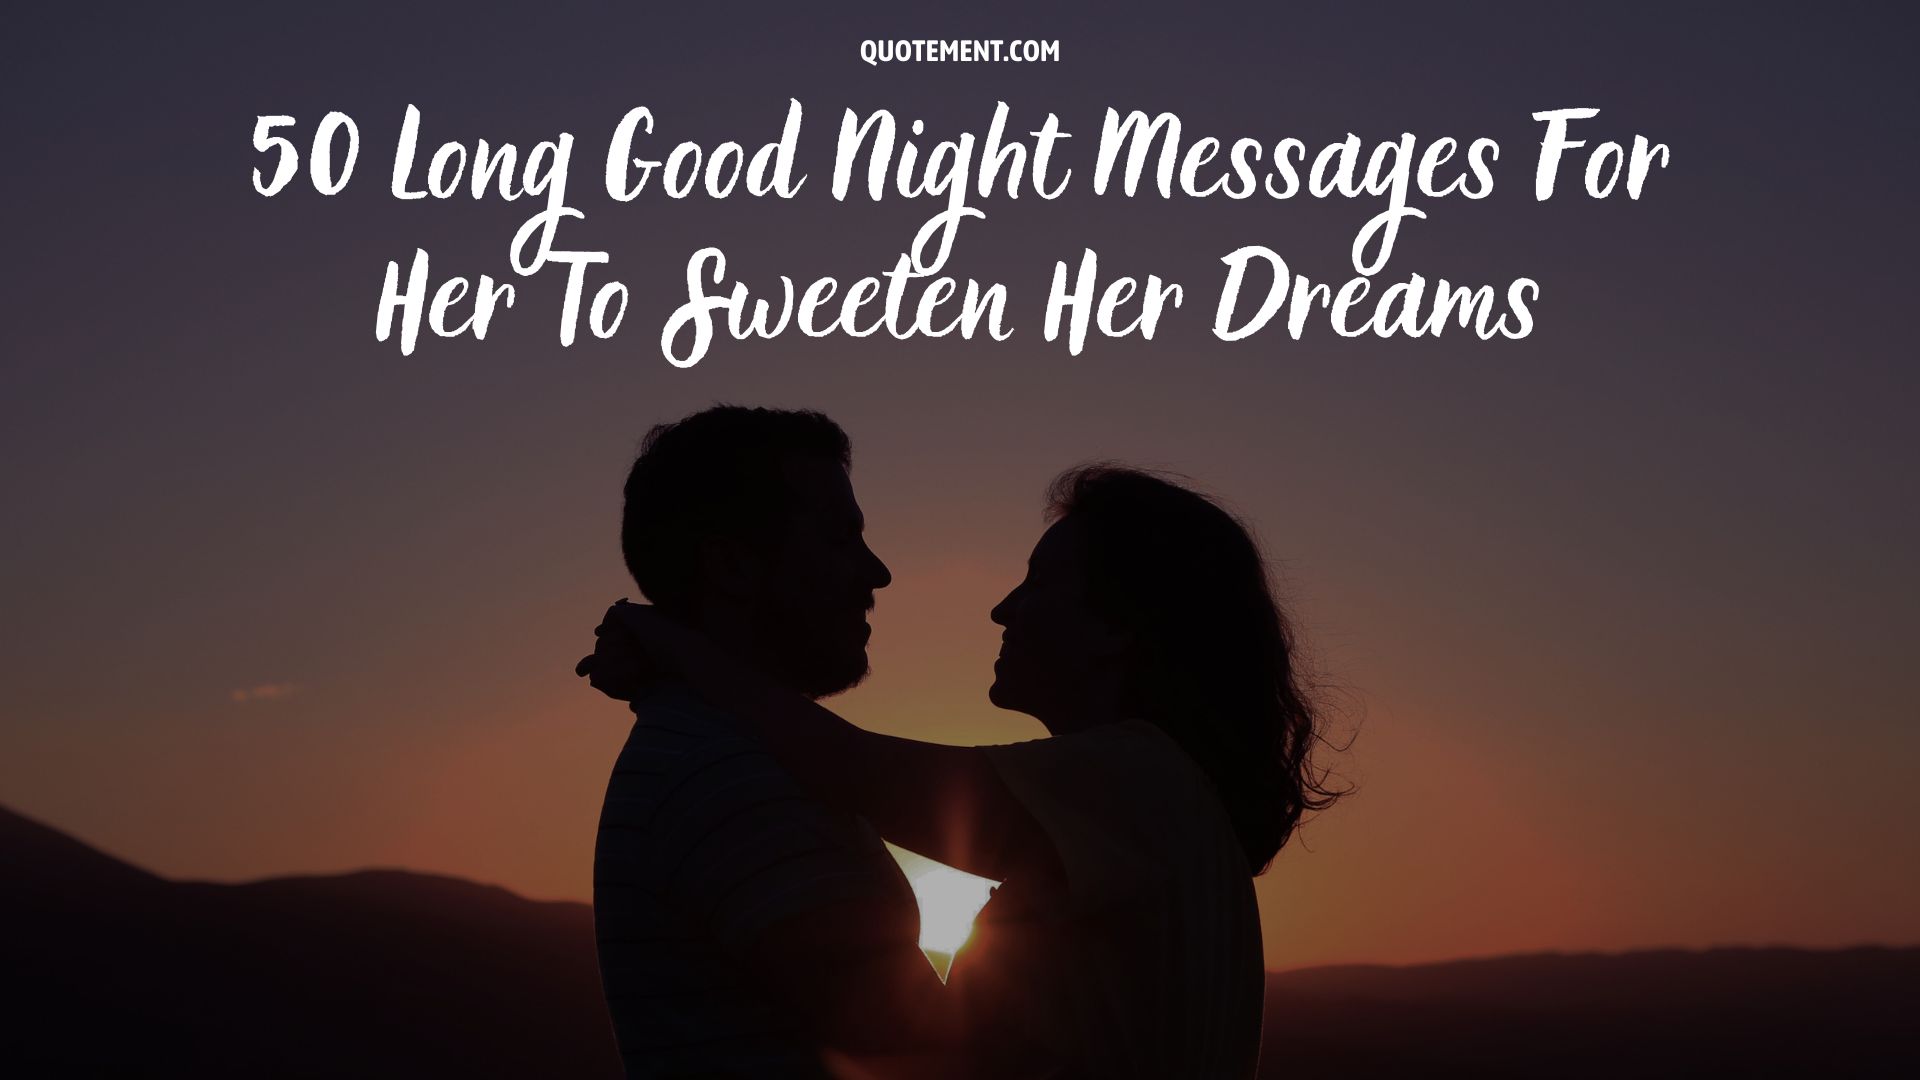 long goodnight messages for her